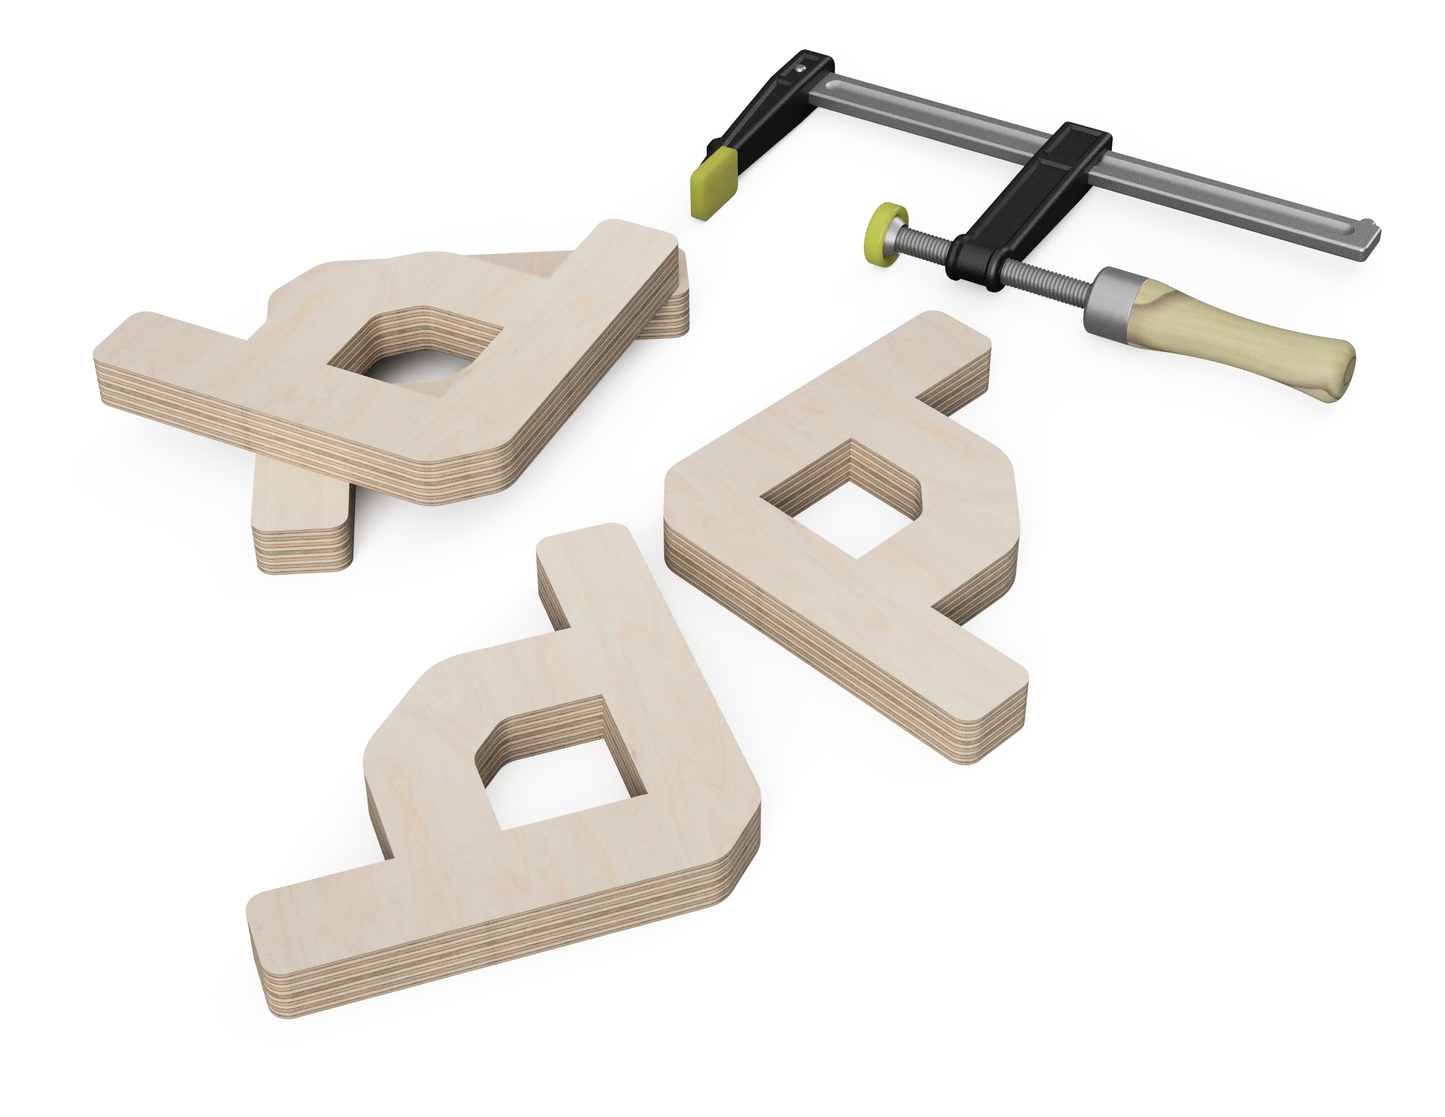 Right Angle Corner Jig DXF Files